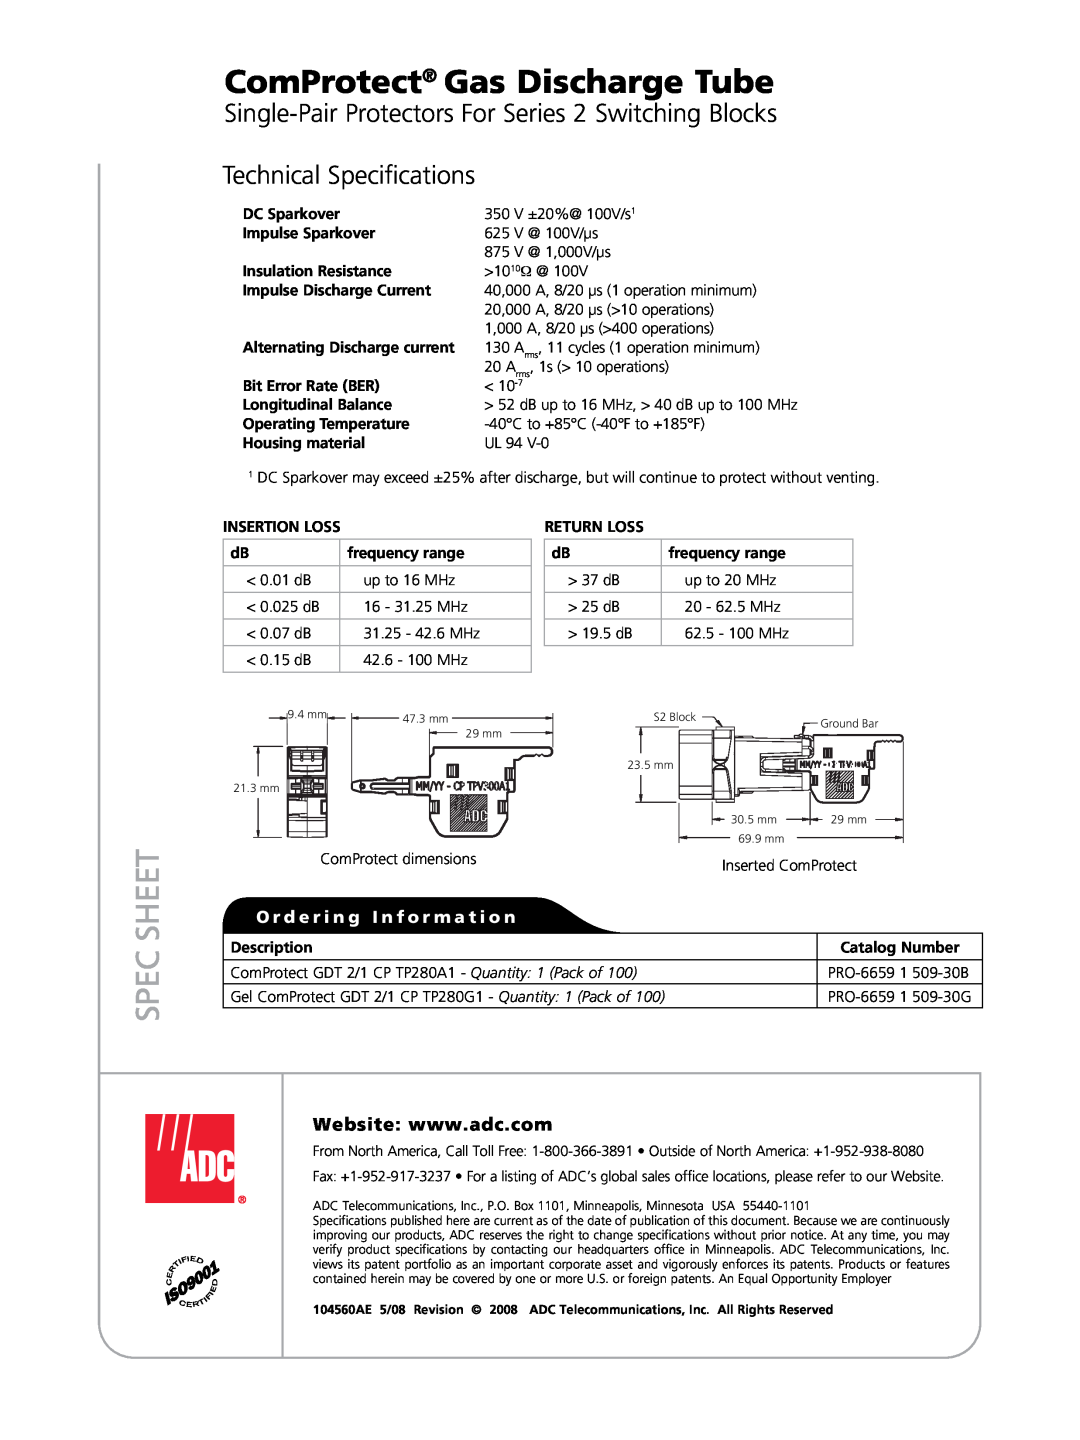 ADC manual Technical Specifications, ComProtect Gas Discharge Tube, Sheet, O r d e r i n g I n f o r m a t i o n 